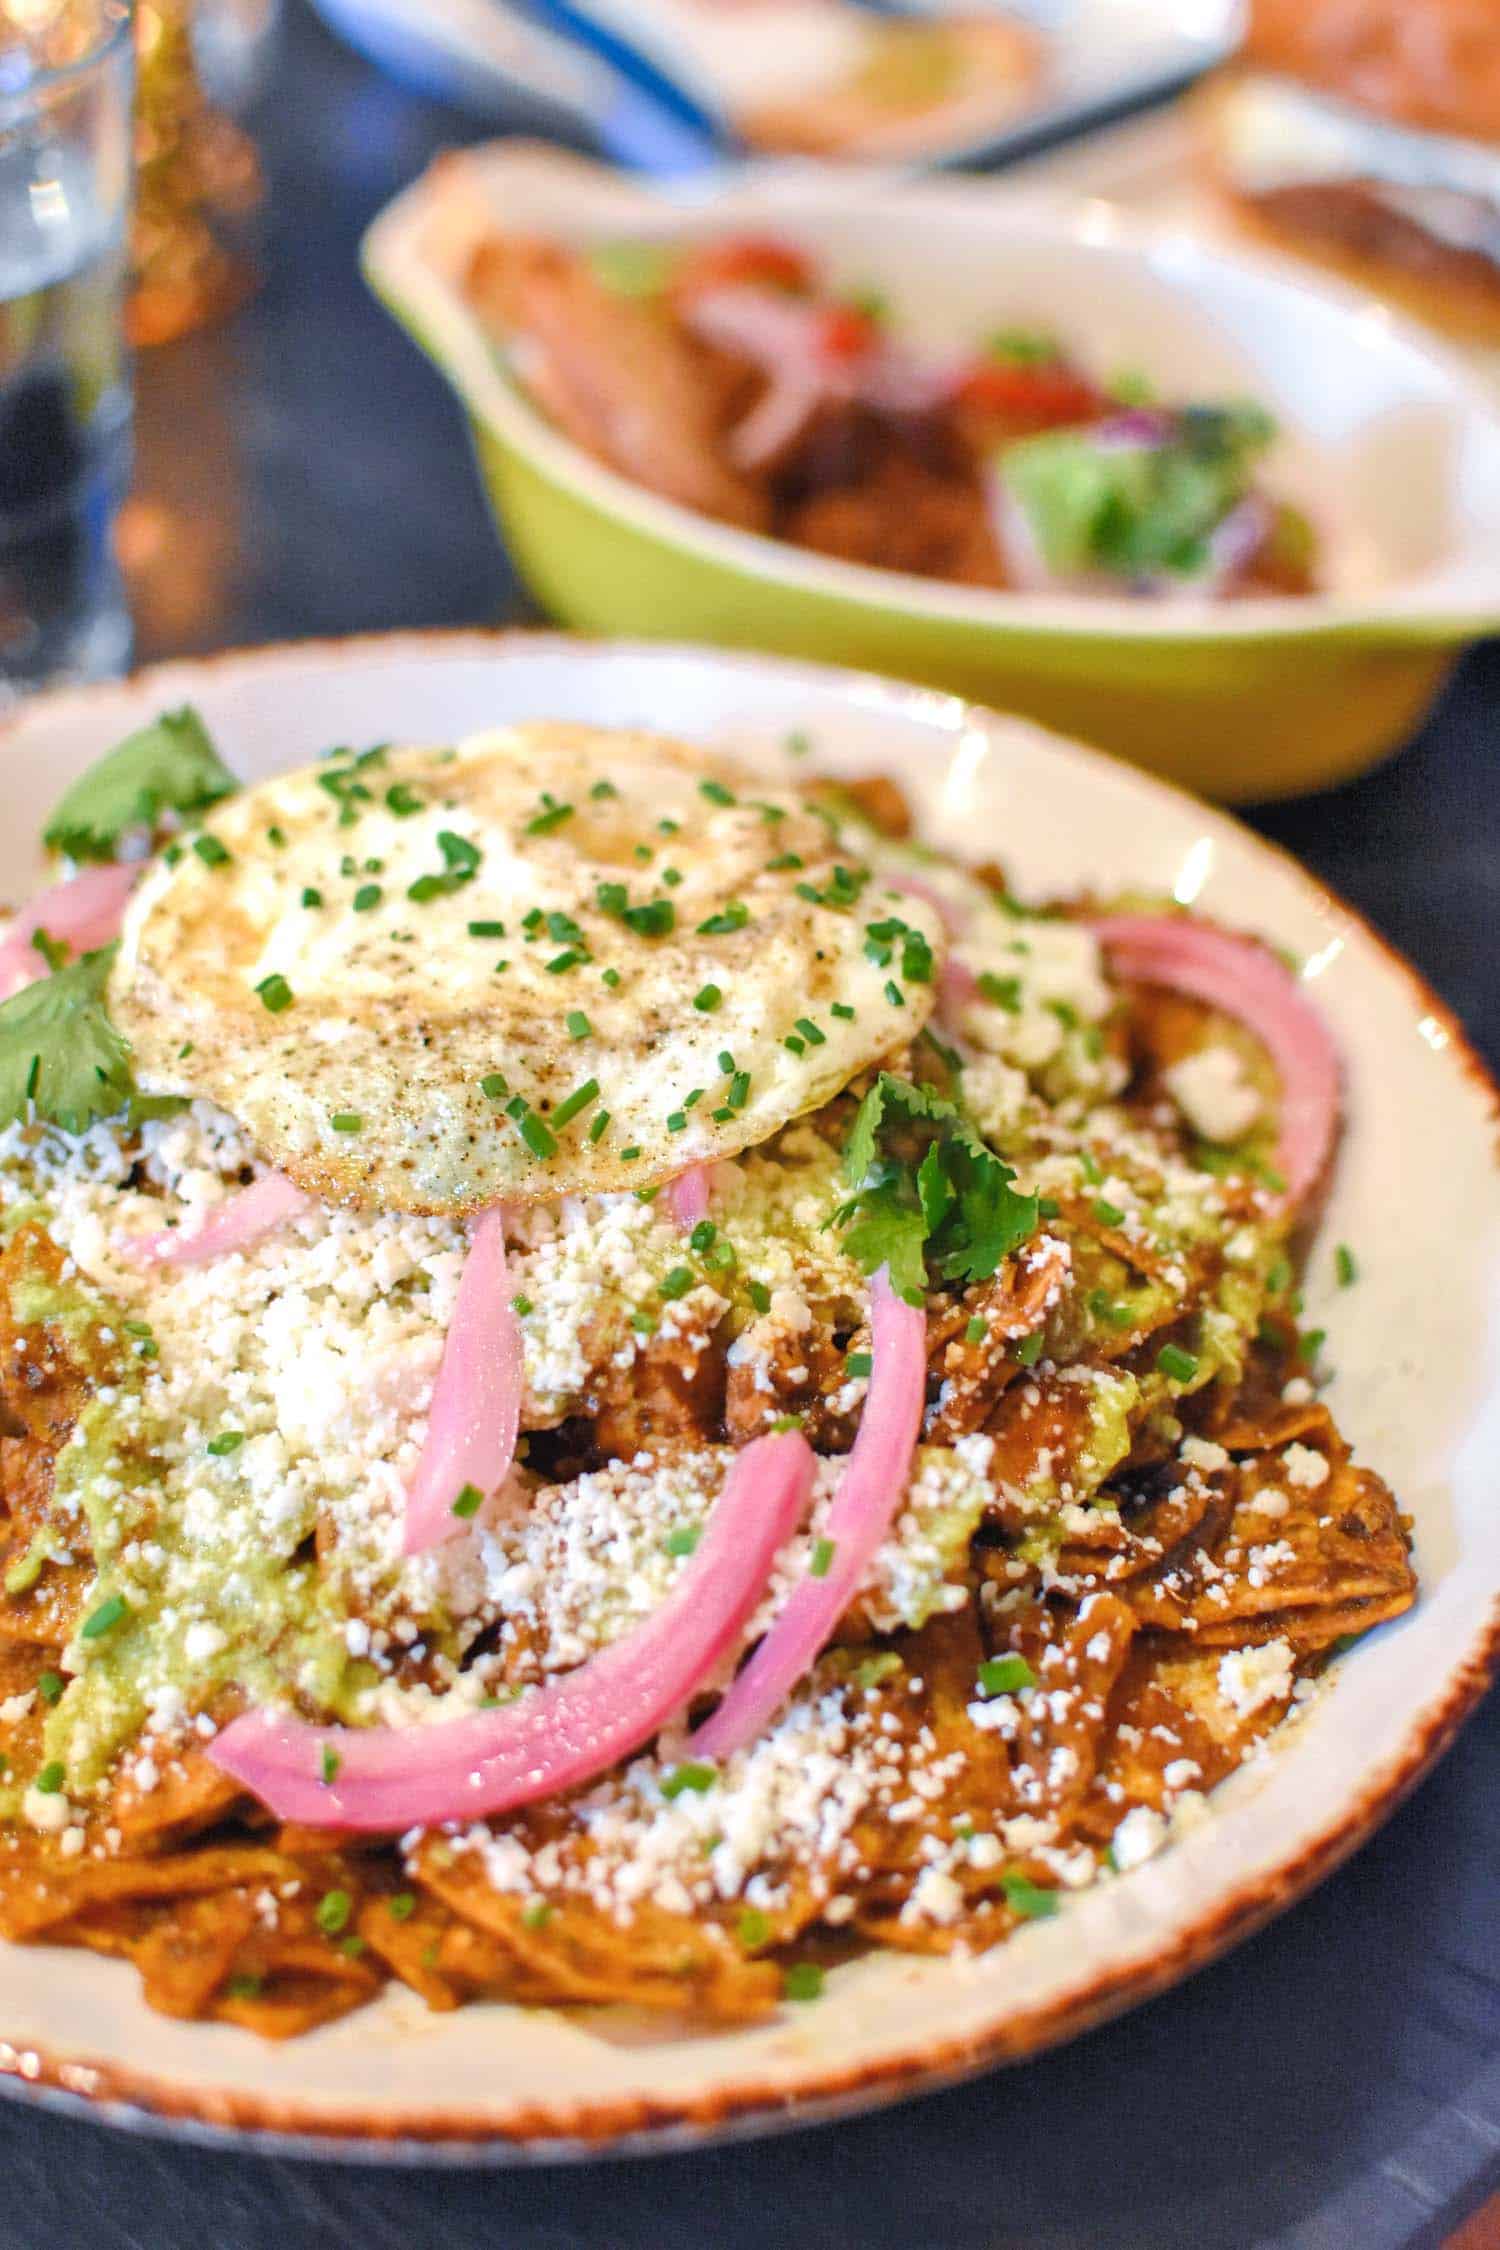 Chilaquiles is just one Honduran food you need to try while visiting Honduras.